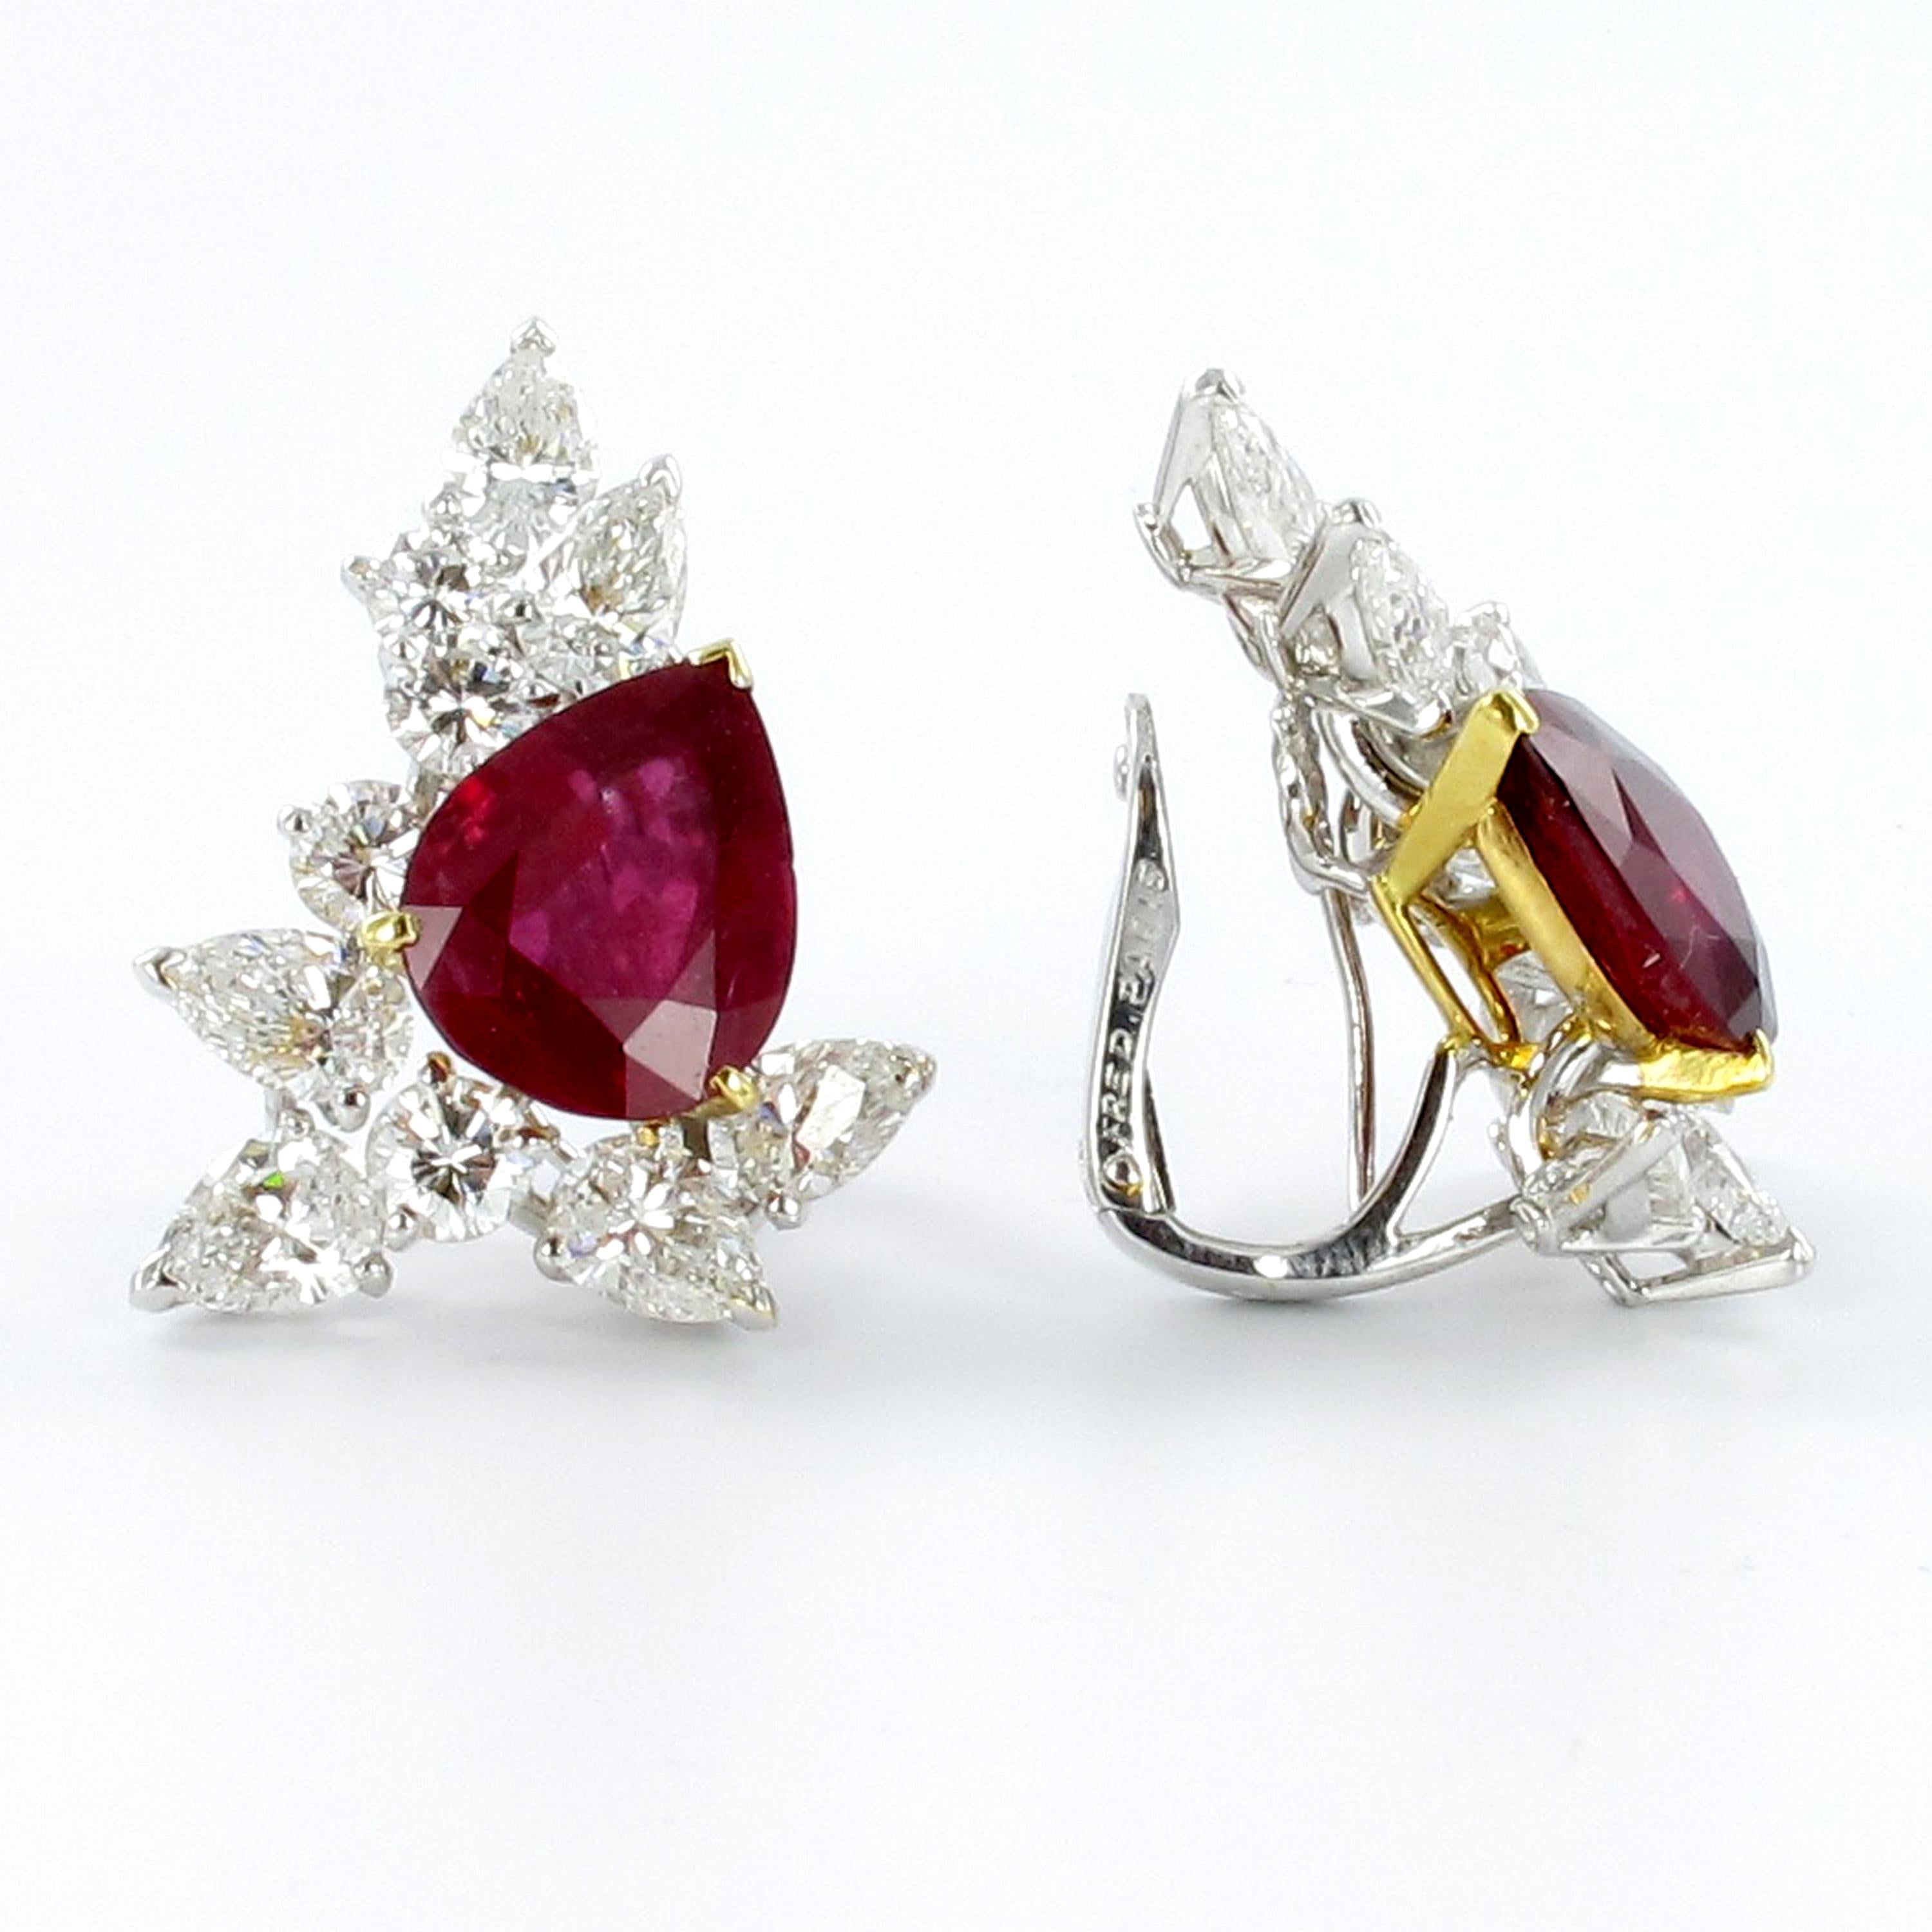 Contemporary Spectacular Pair of Ruby and Diamond Ear Clips by FRED